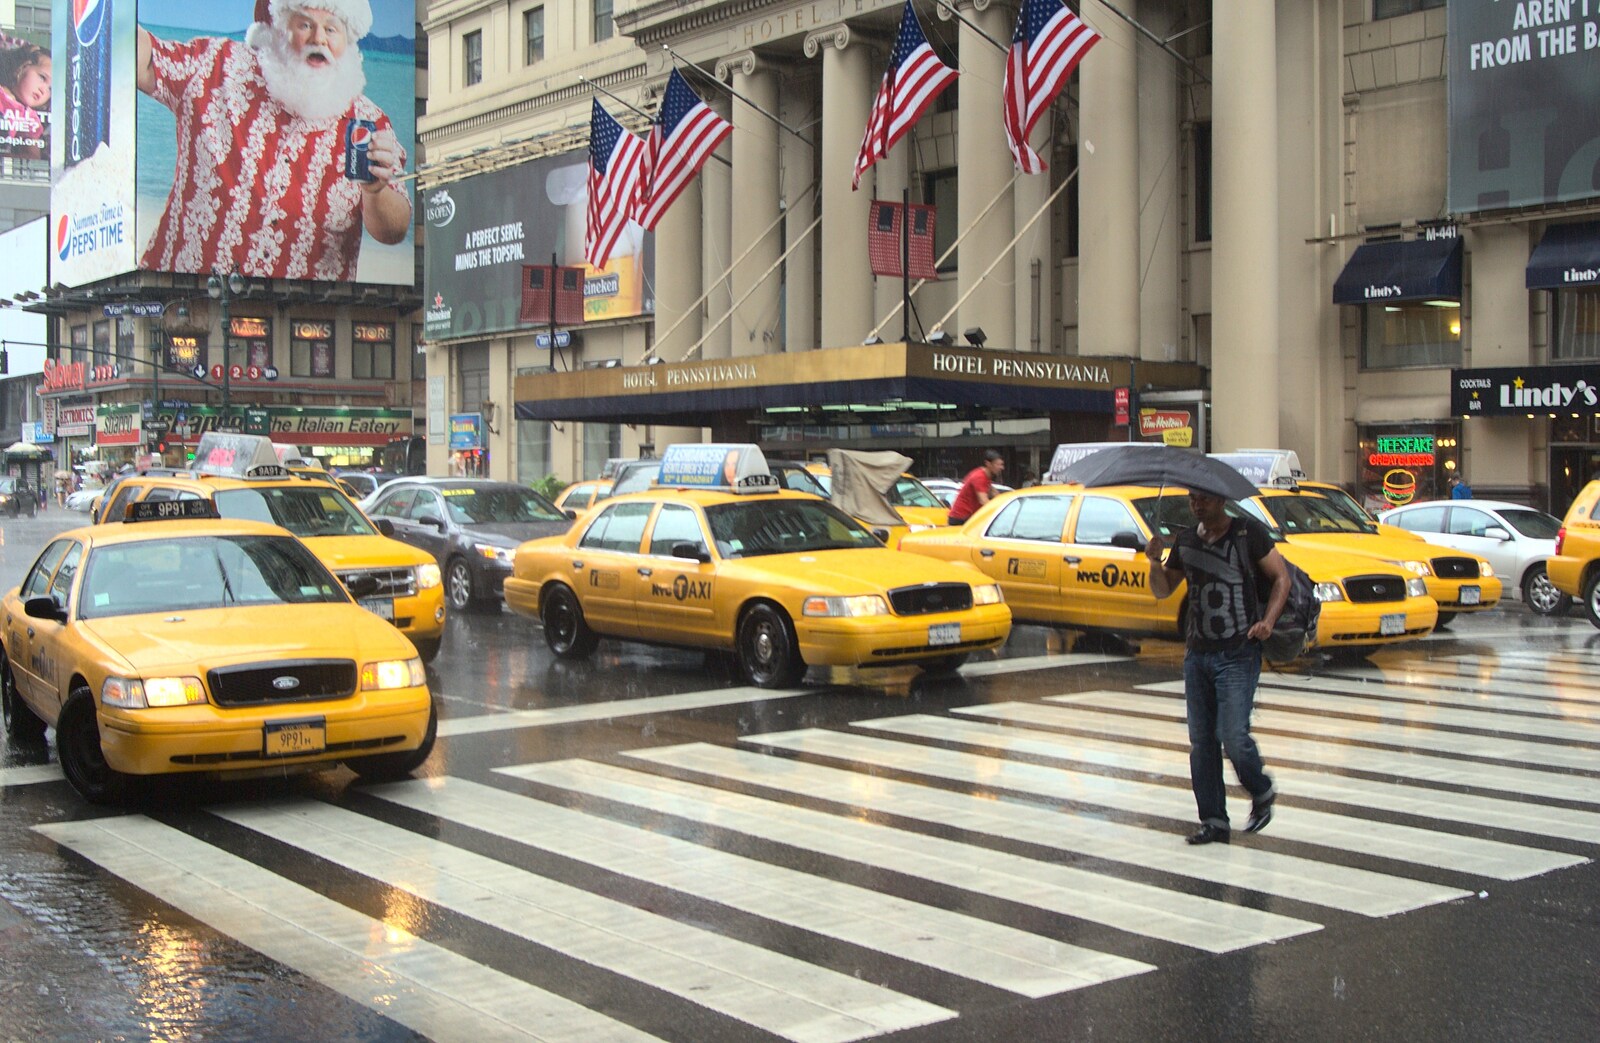 Taxis in the rain from A Manhattan Hotdog, New York, USA - 21st August 2011